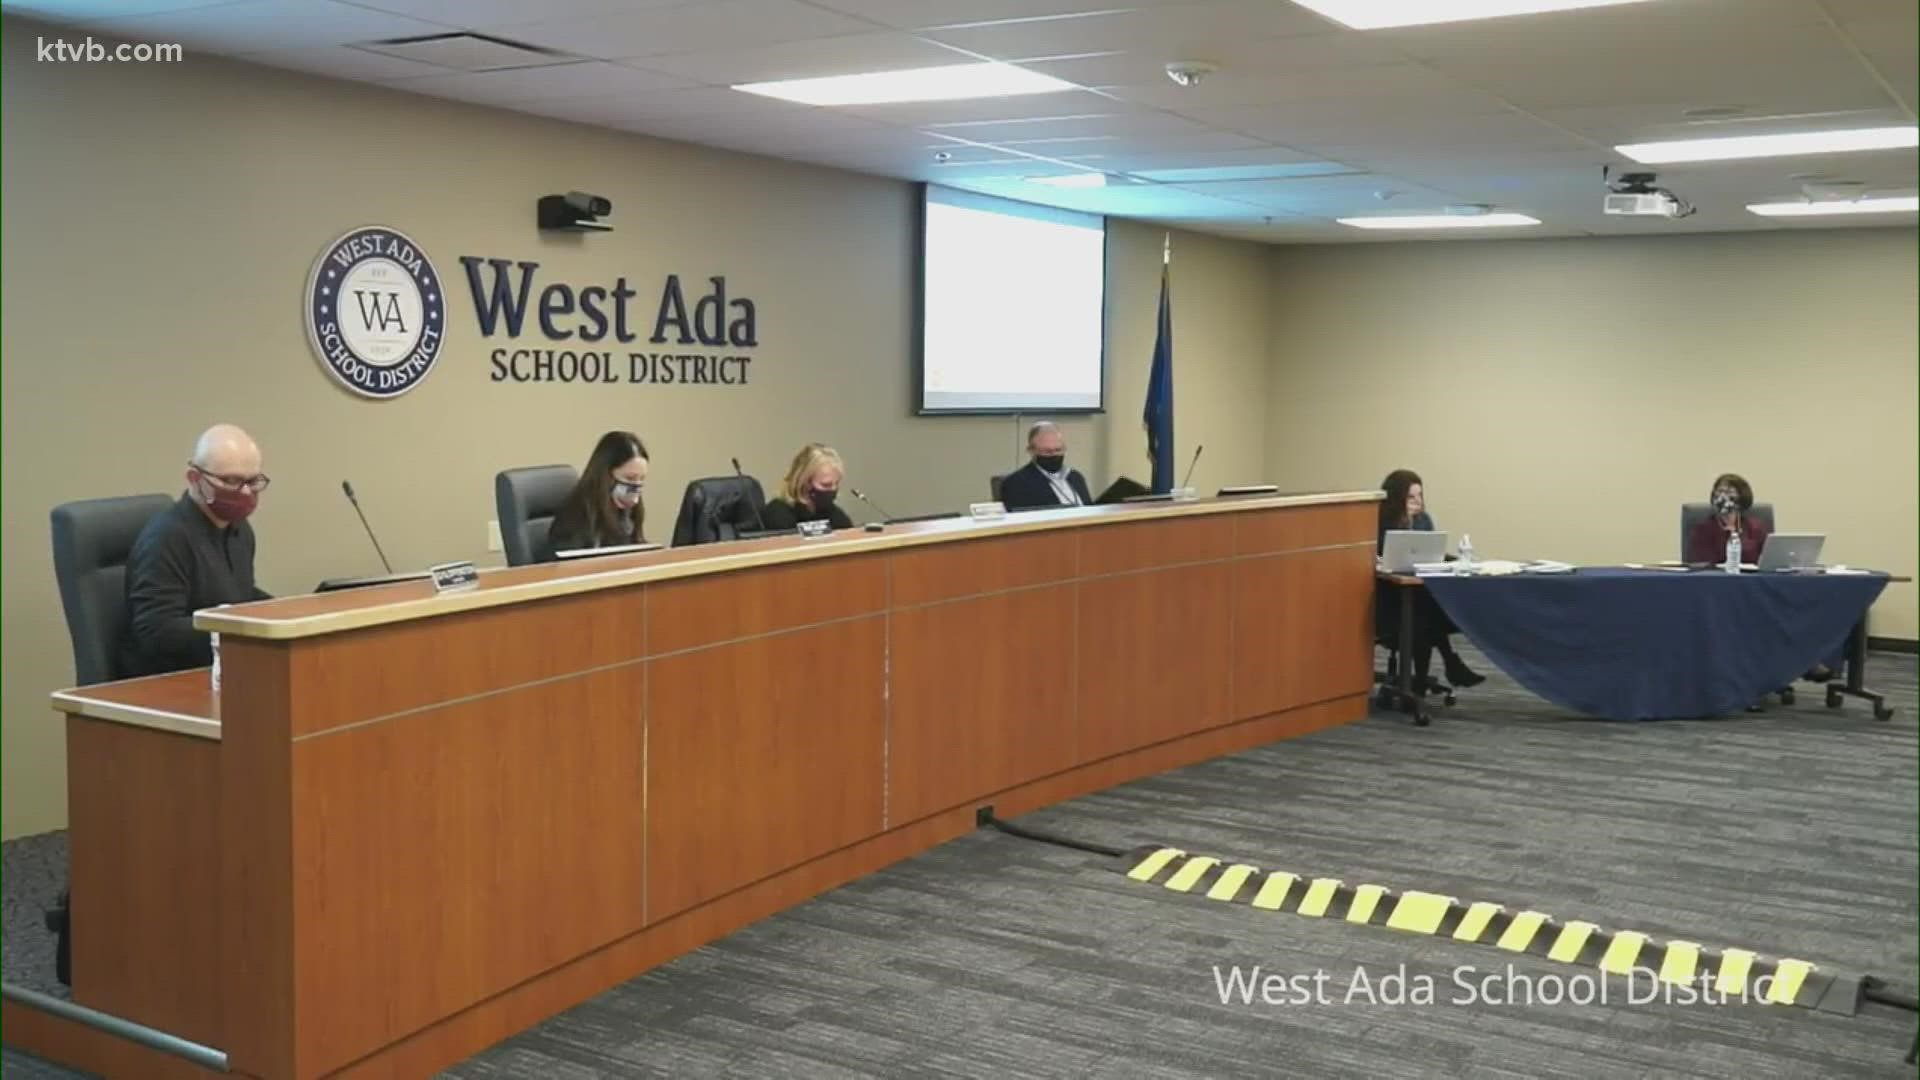 West Ada's grade 6-12 students could return to the classroom four days a week as early as March 29 under the approved reopening plan.